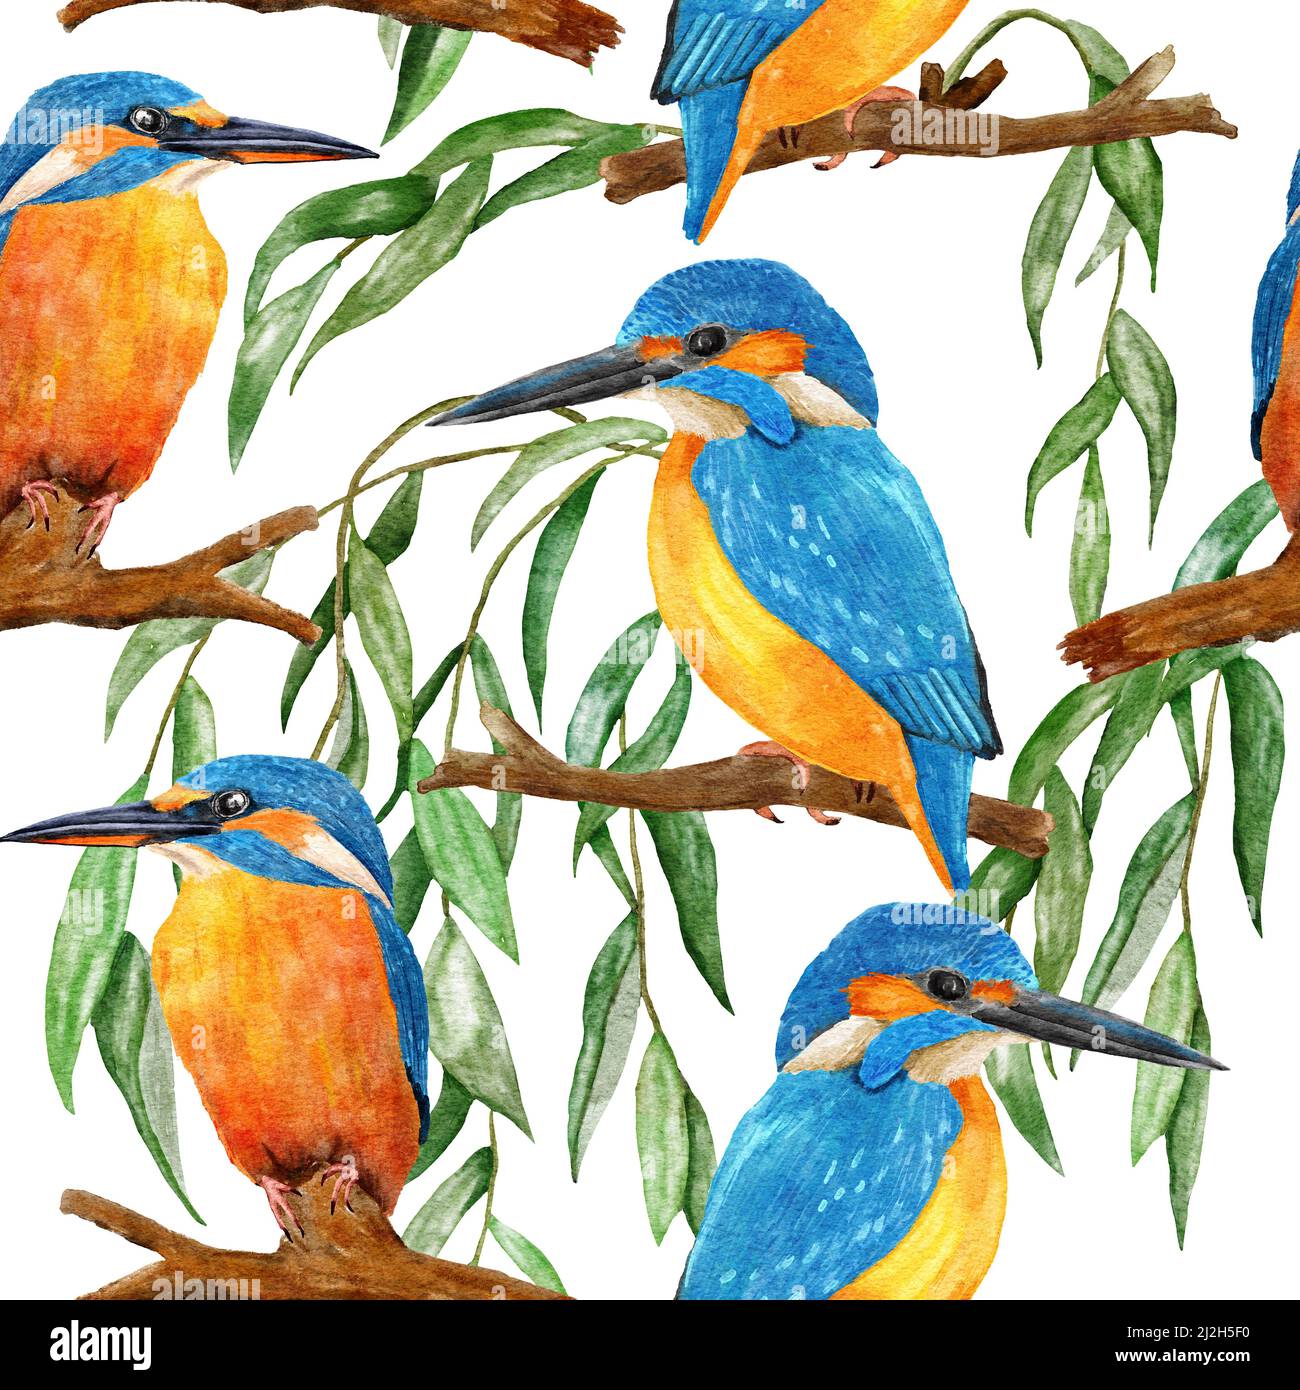 Watercolor seamless hand drawn pattern with wild kingfisher bee-eater birds in forest woodland. Wildlife natural vintage background with floral leaves greenery branches, nature bird flying design Stock Photo